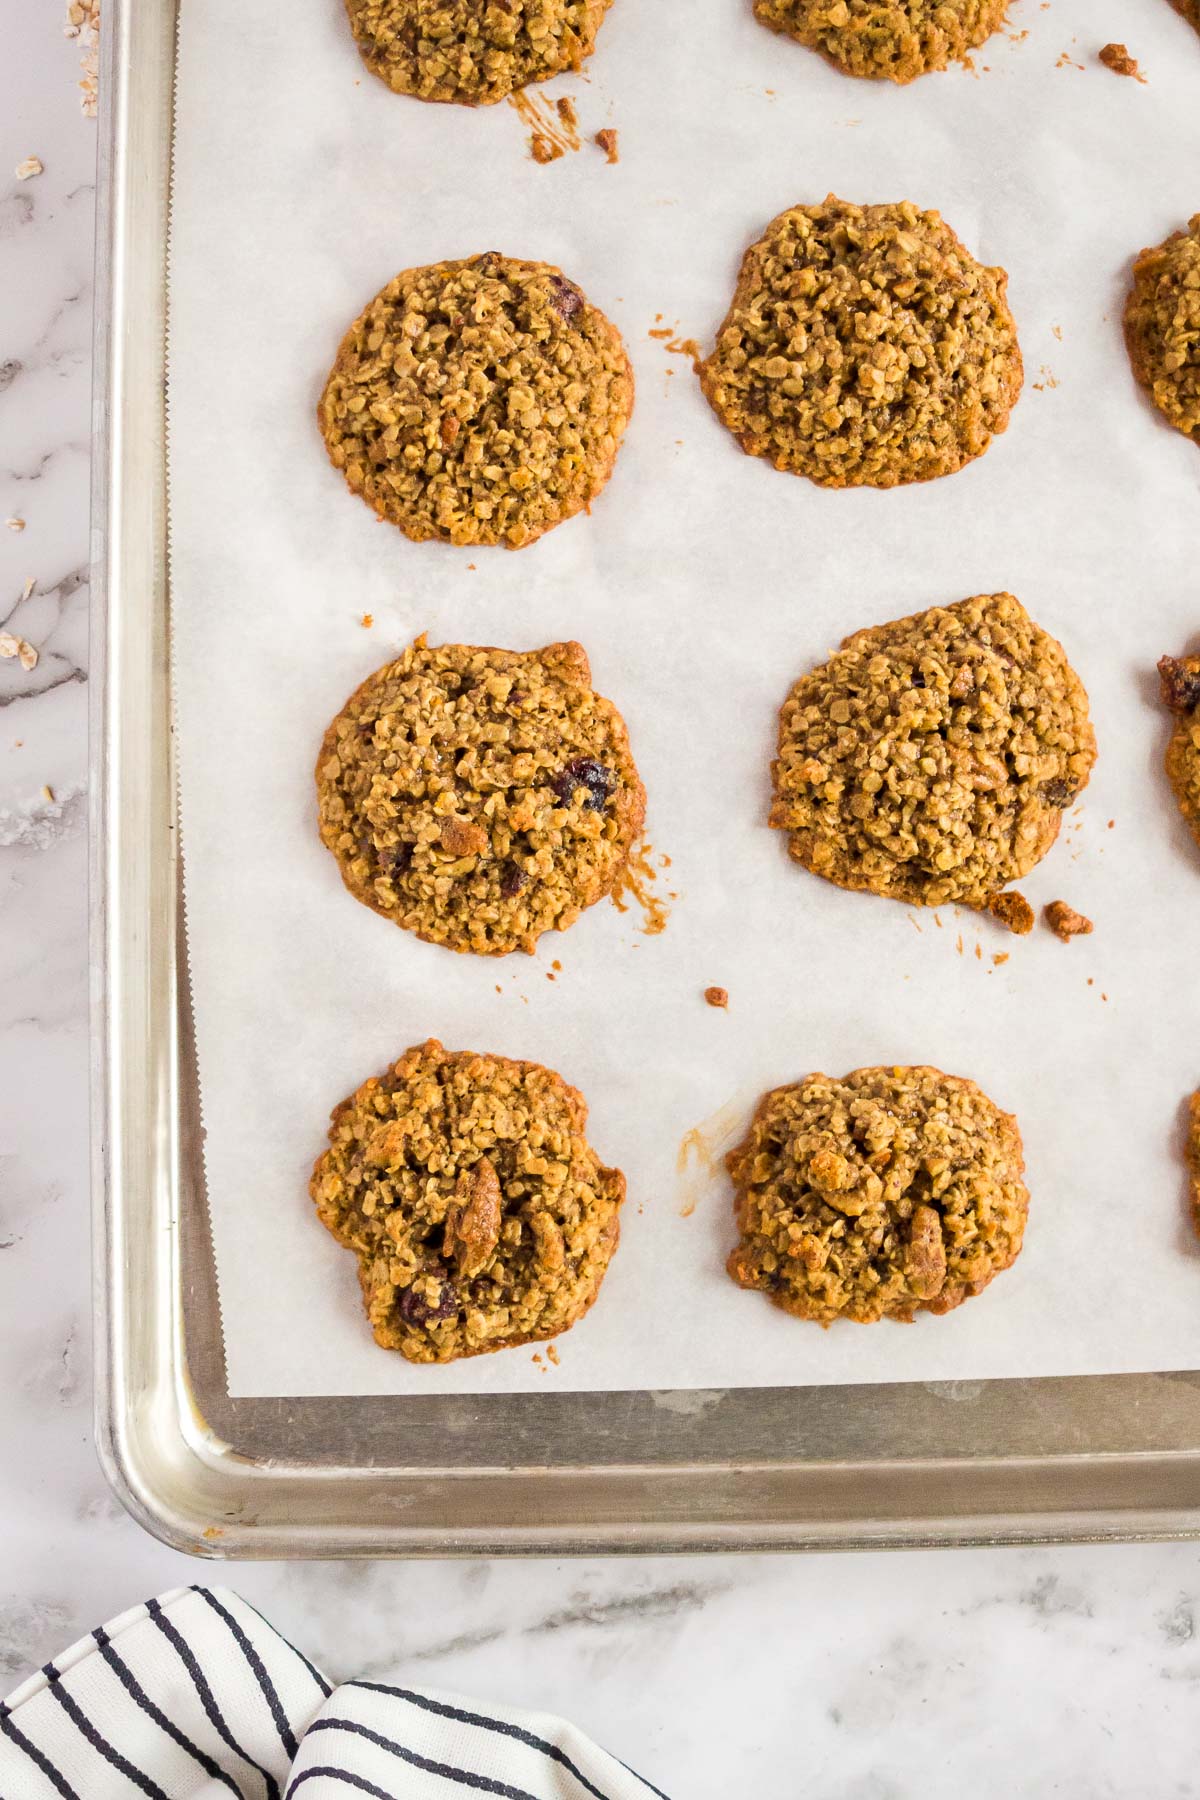 Baked oatmeal craisin cookies on a cookie sheet